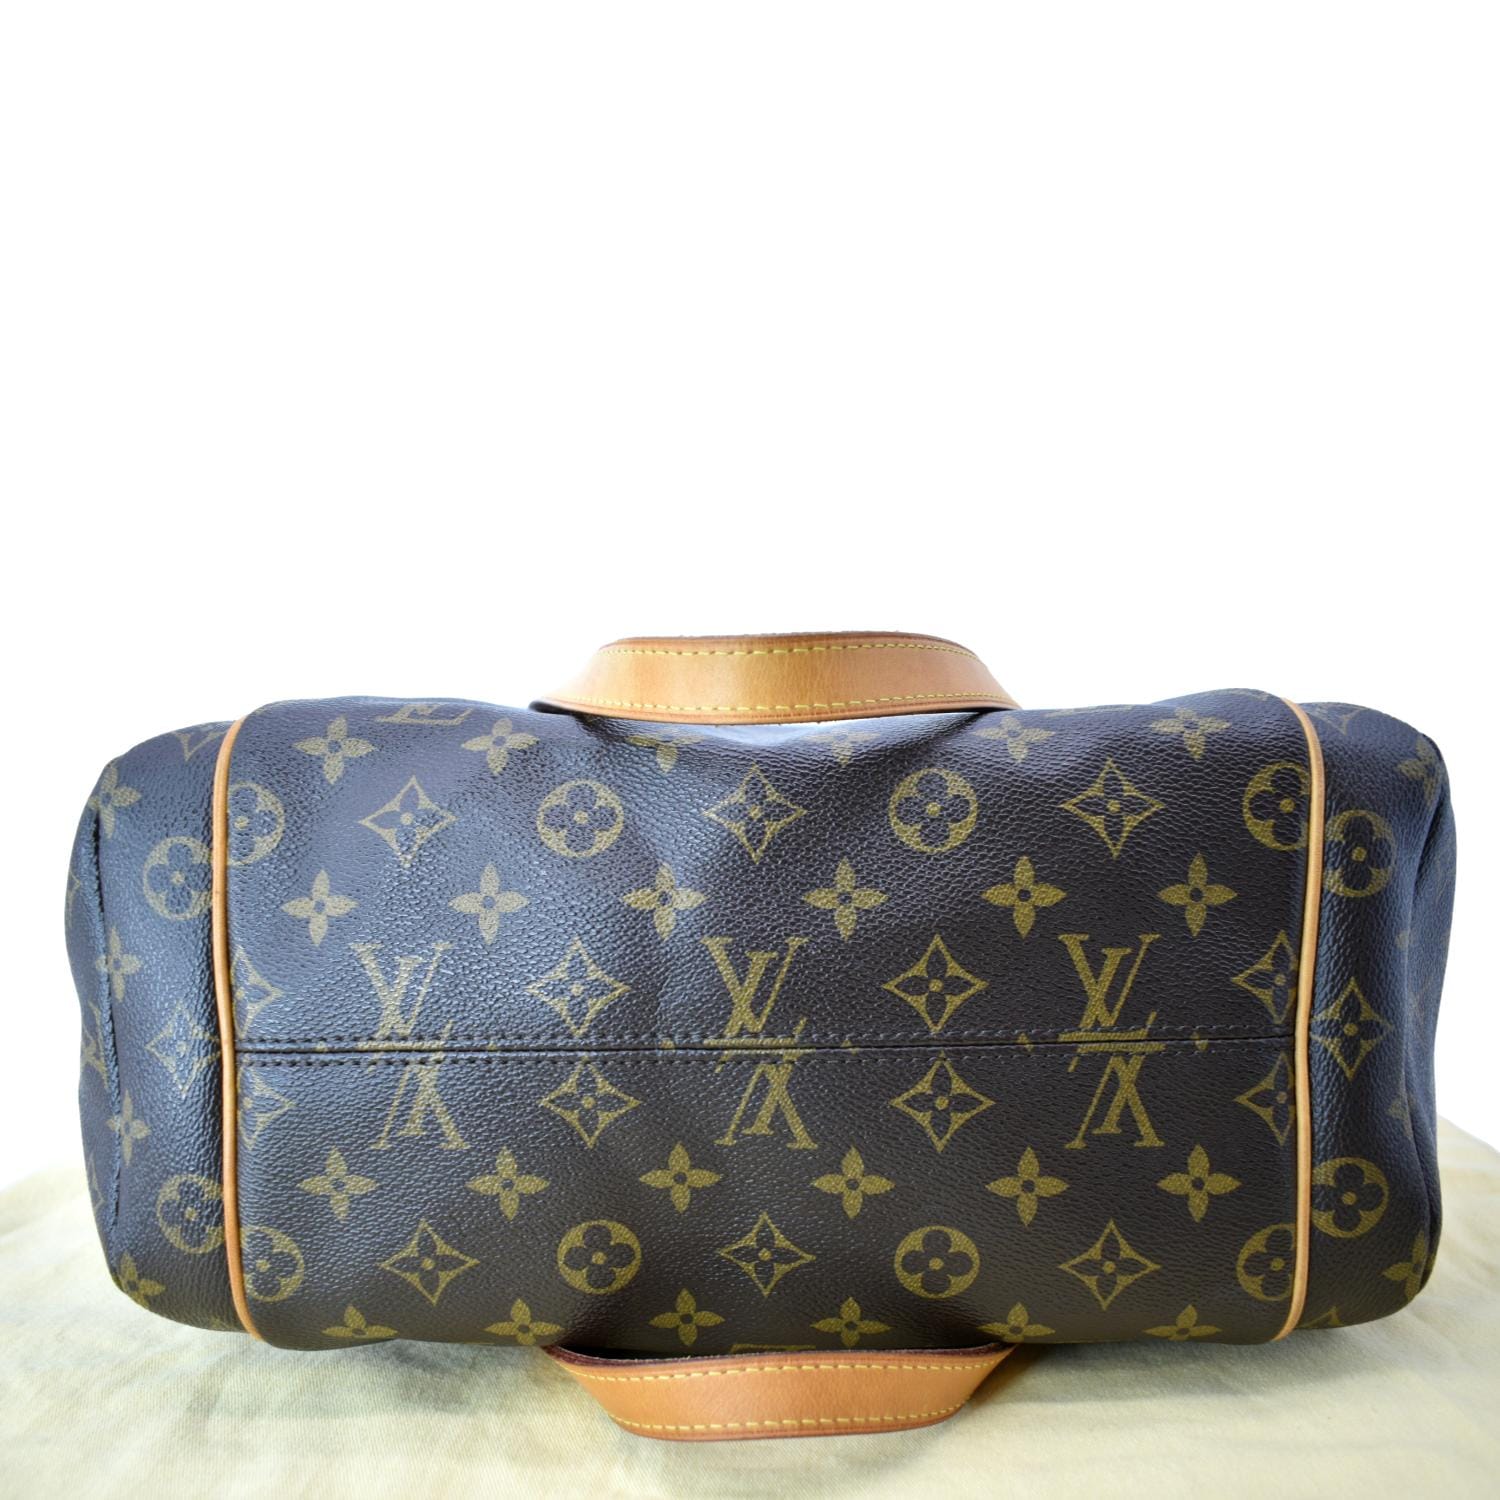 Louis Vuitton V Tote Monogram Canvas and Leather MM Brown 1802751